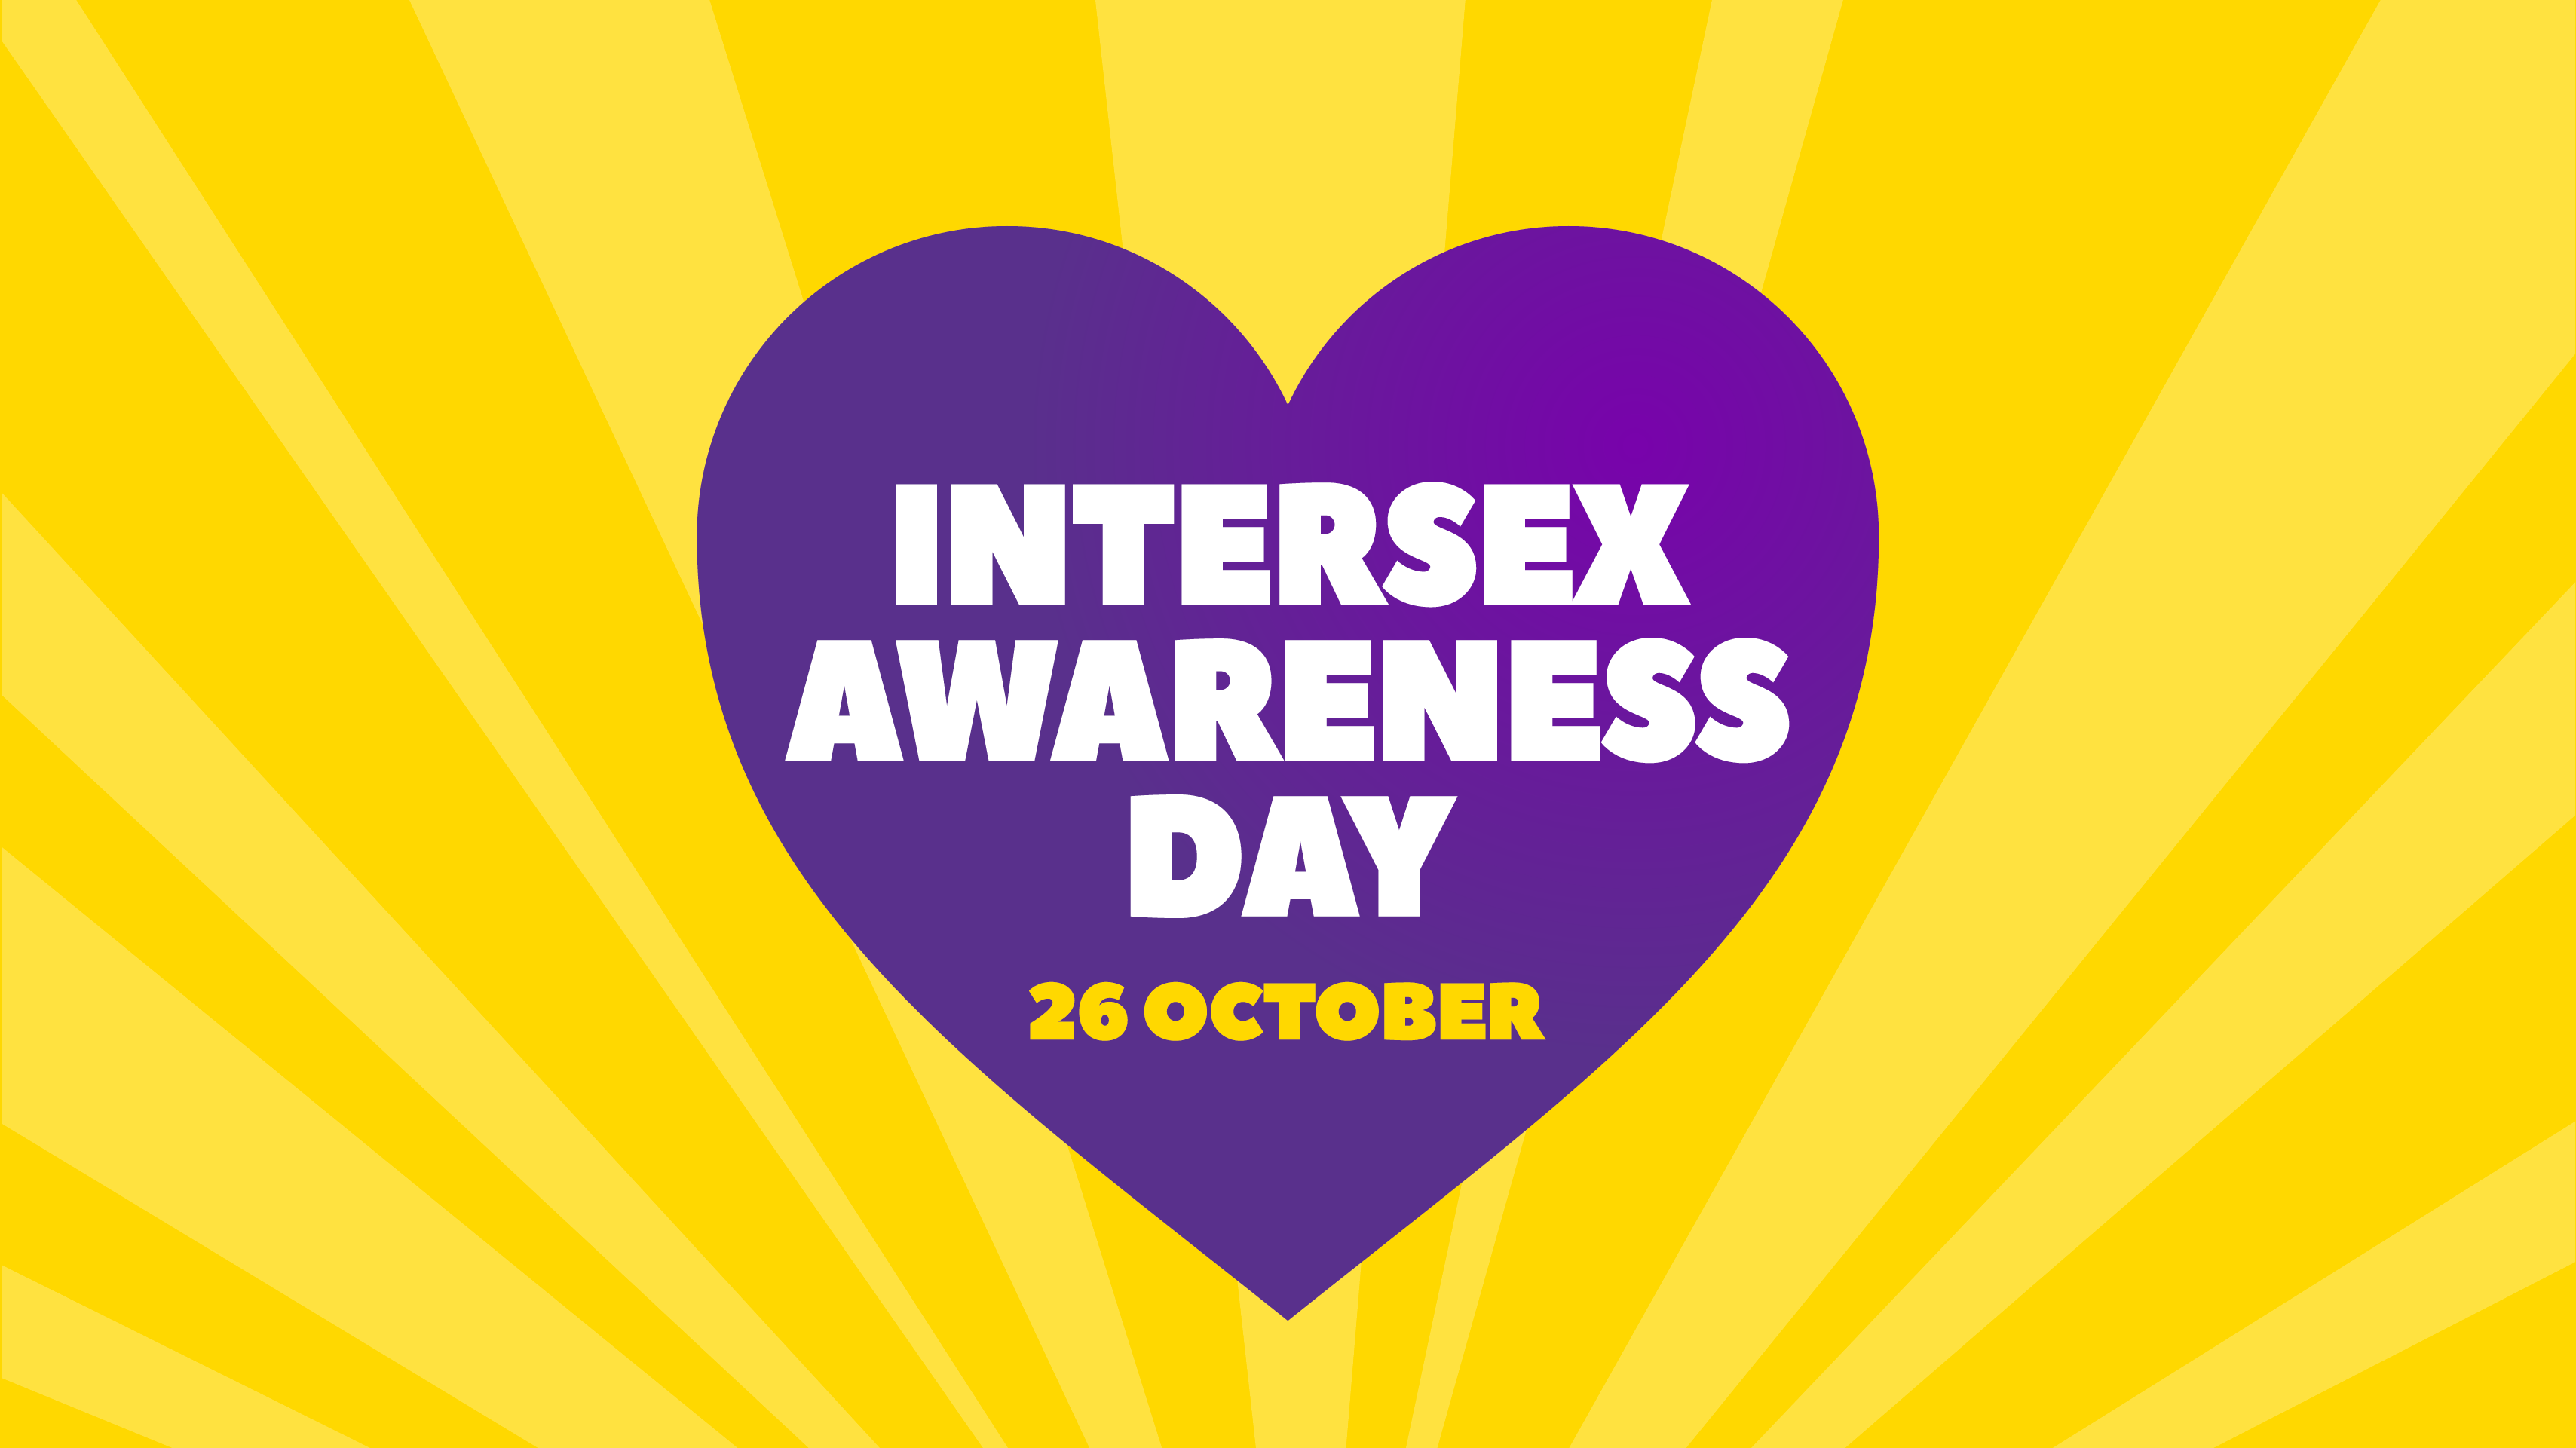 intersex awareness day in white in purple heart in turn surrounded by yellow background